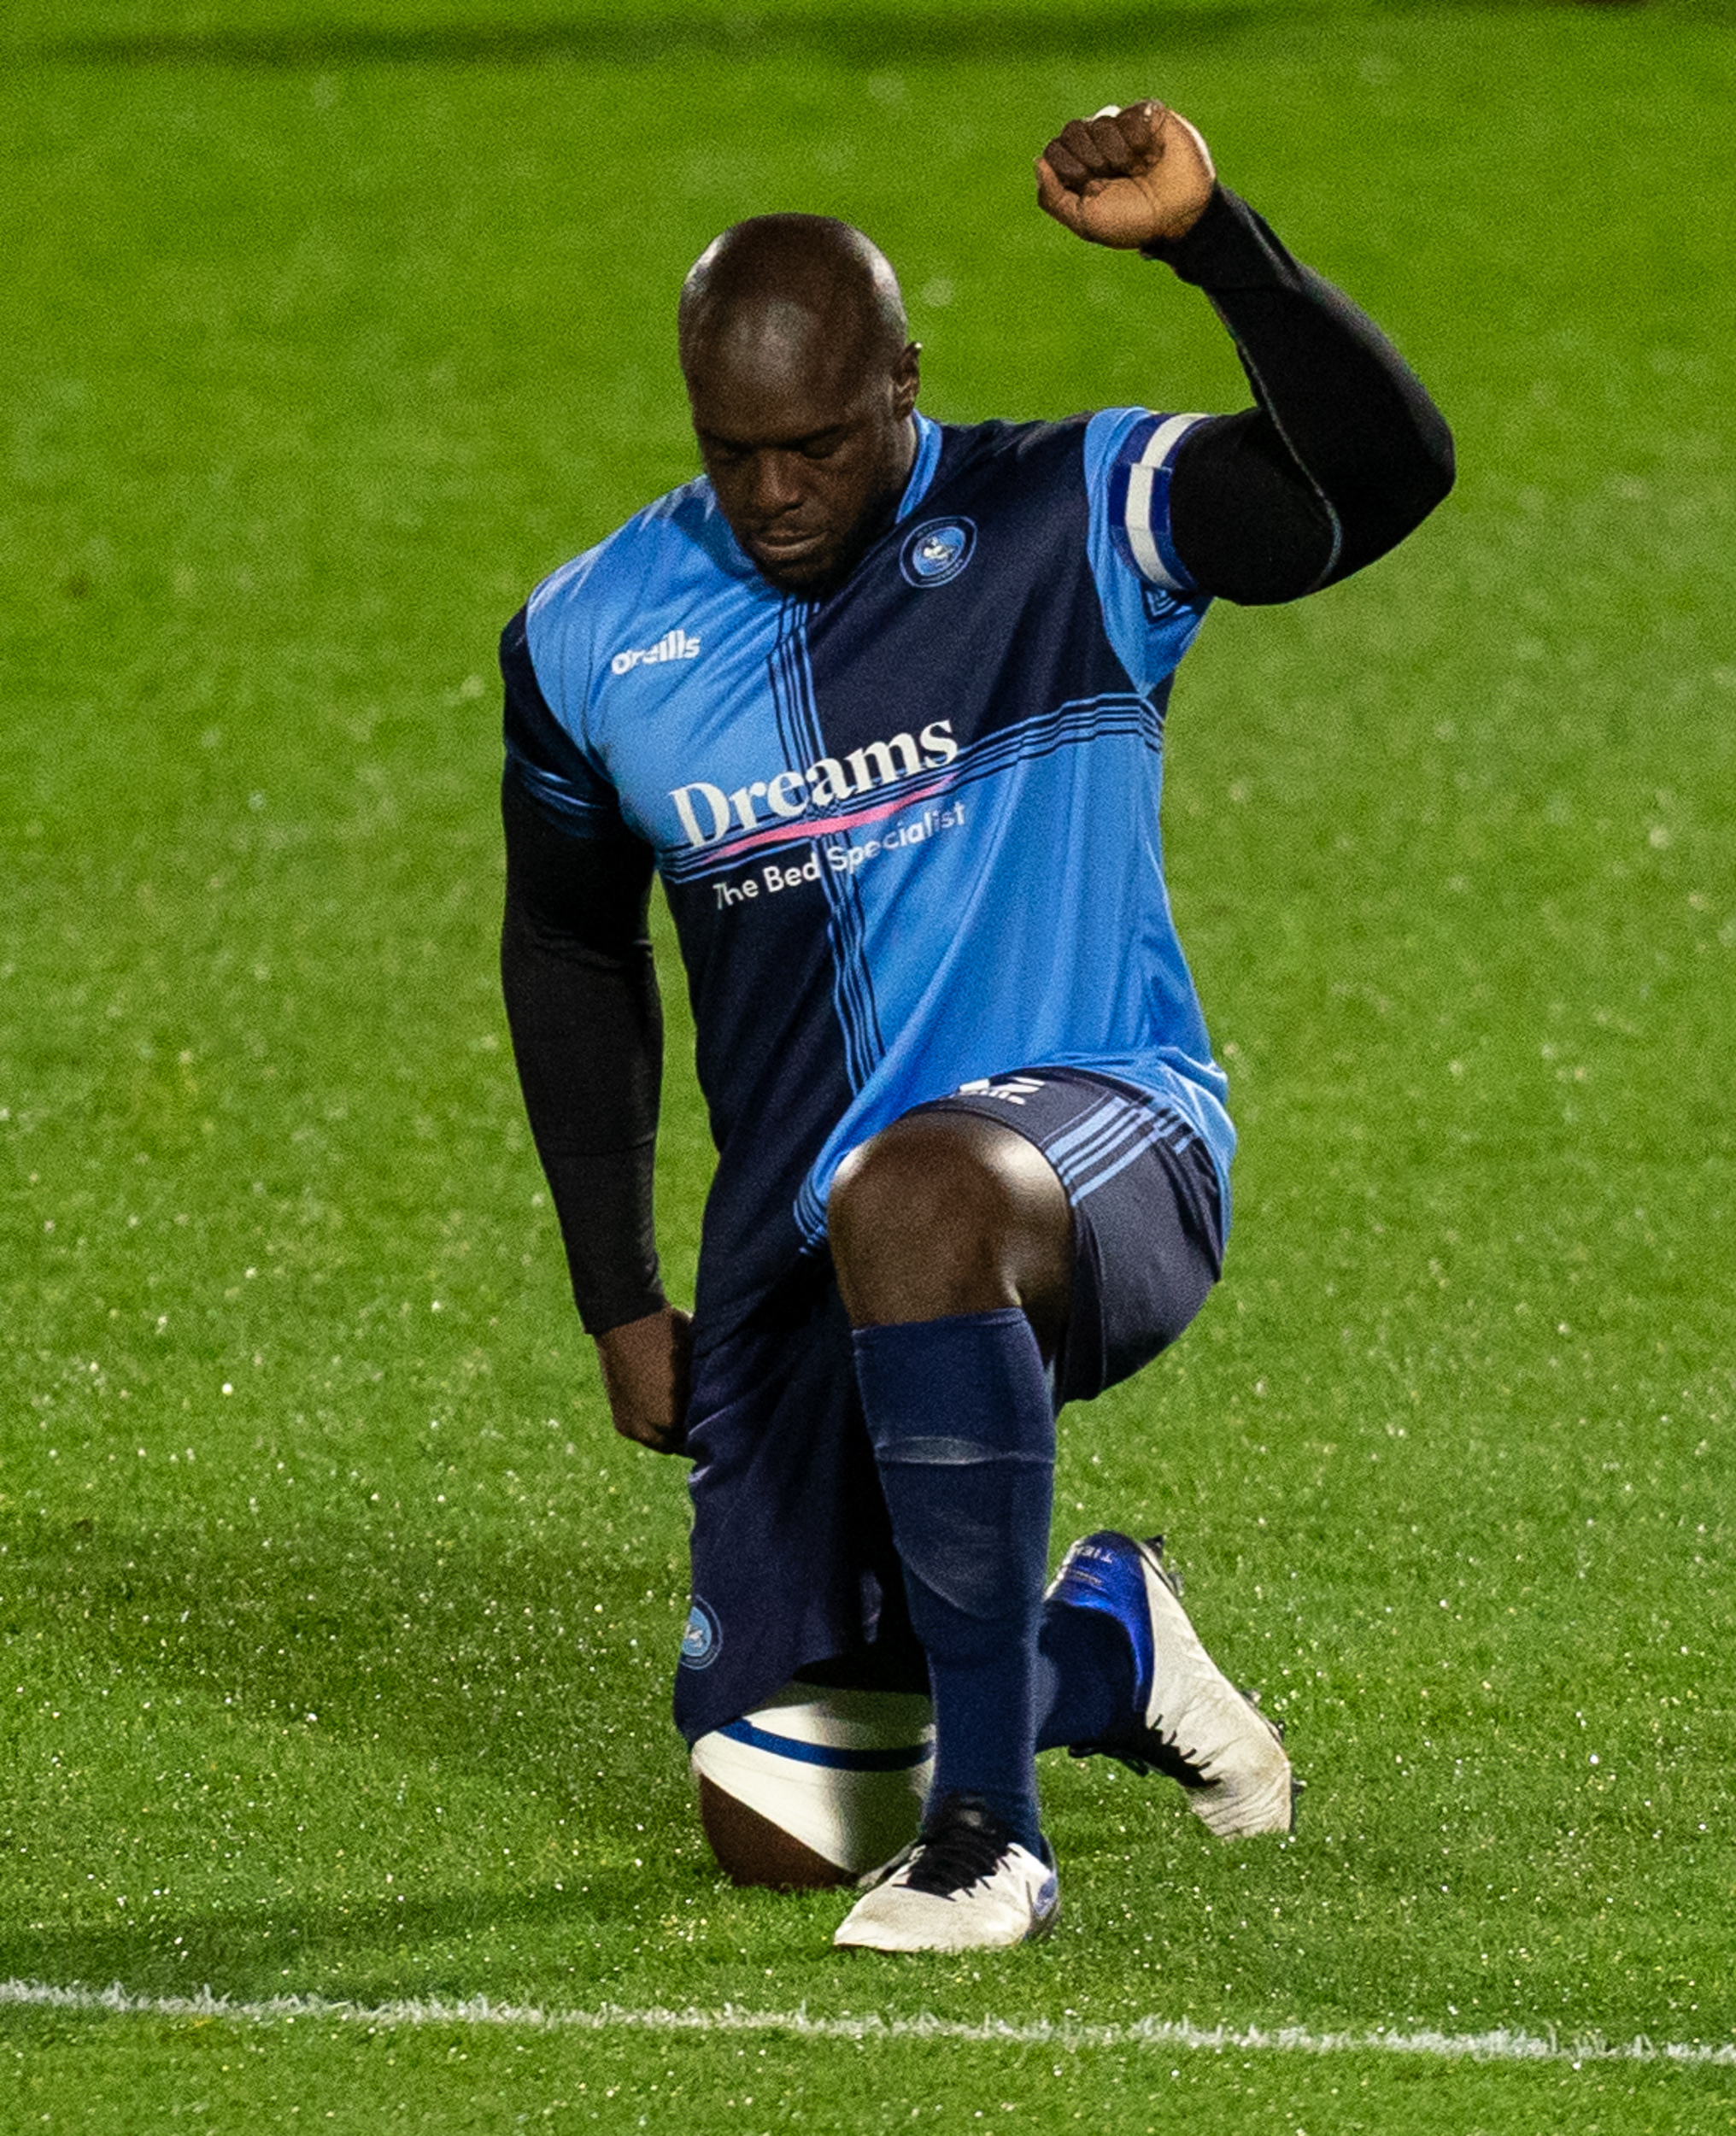 Akinfenwa captained the side on a few occassions, which included in the 0-0 draw against Huddersfield Town on November 24 (Prime Media)